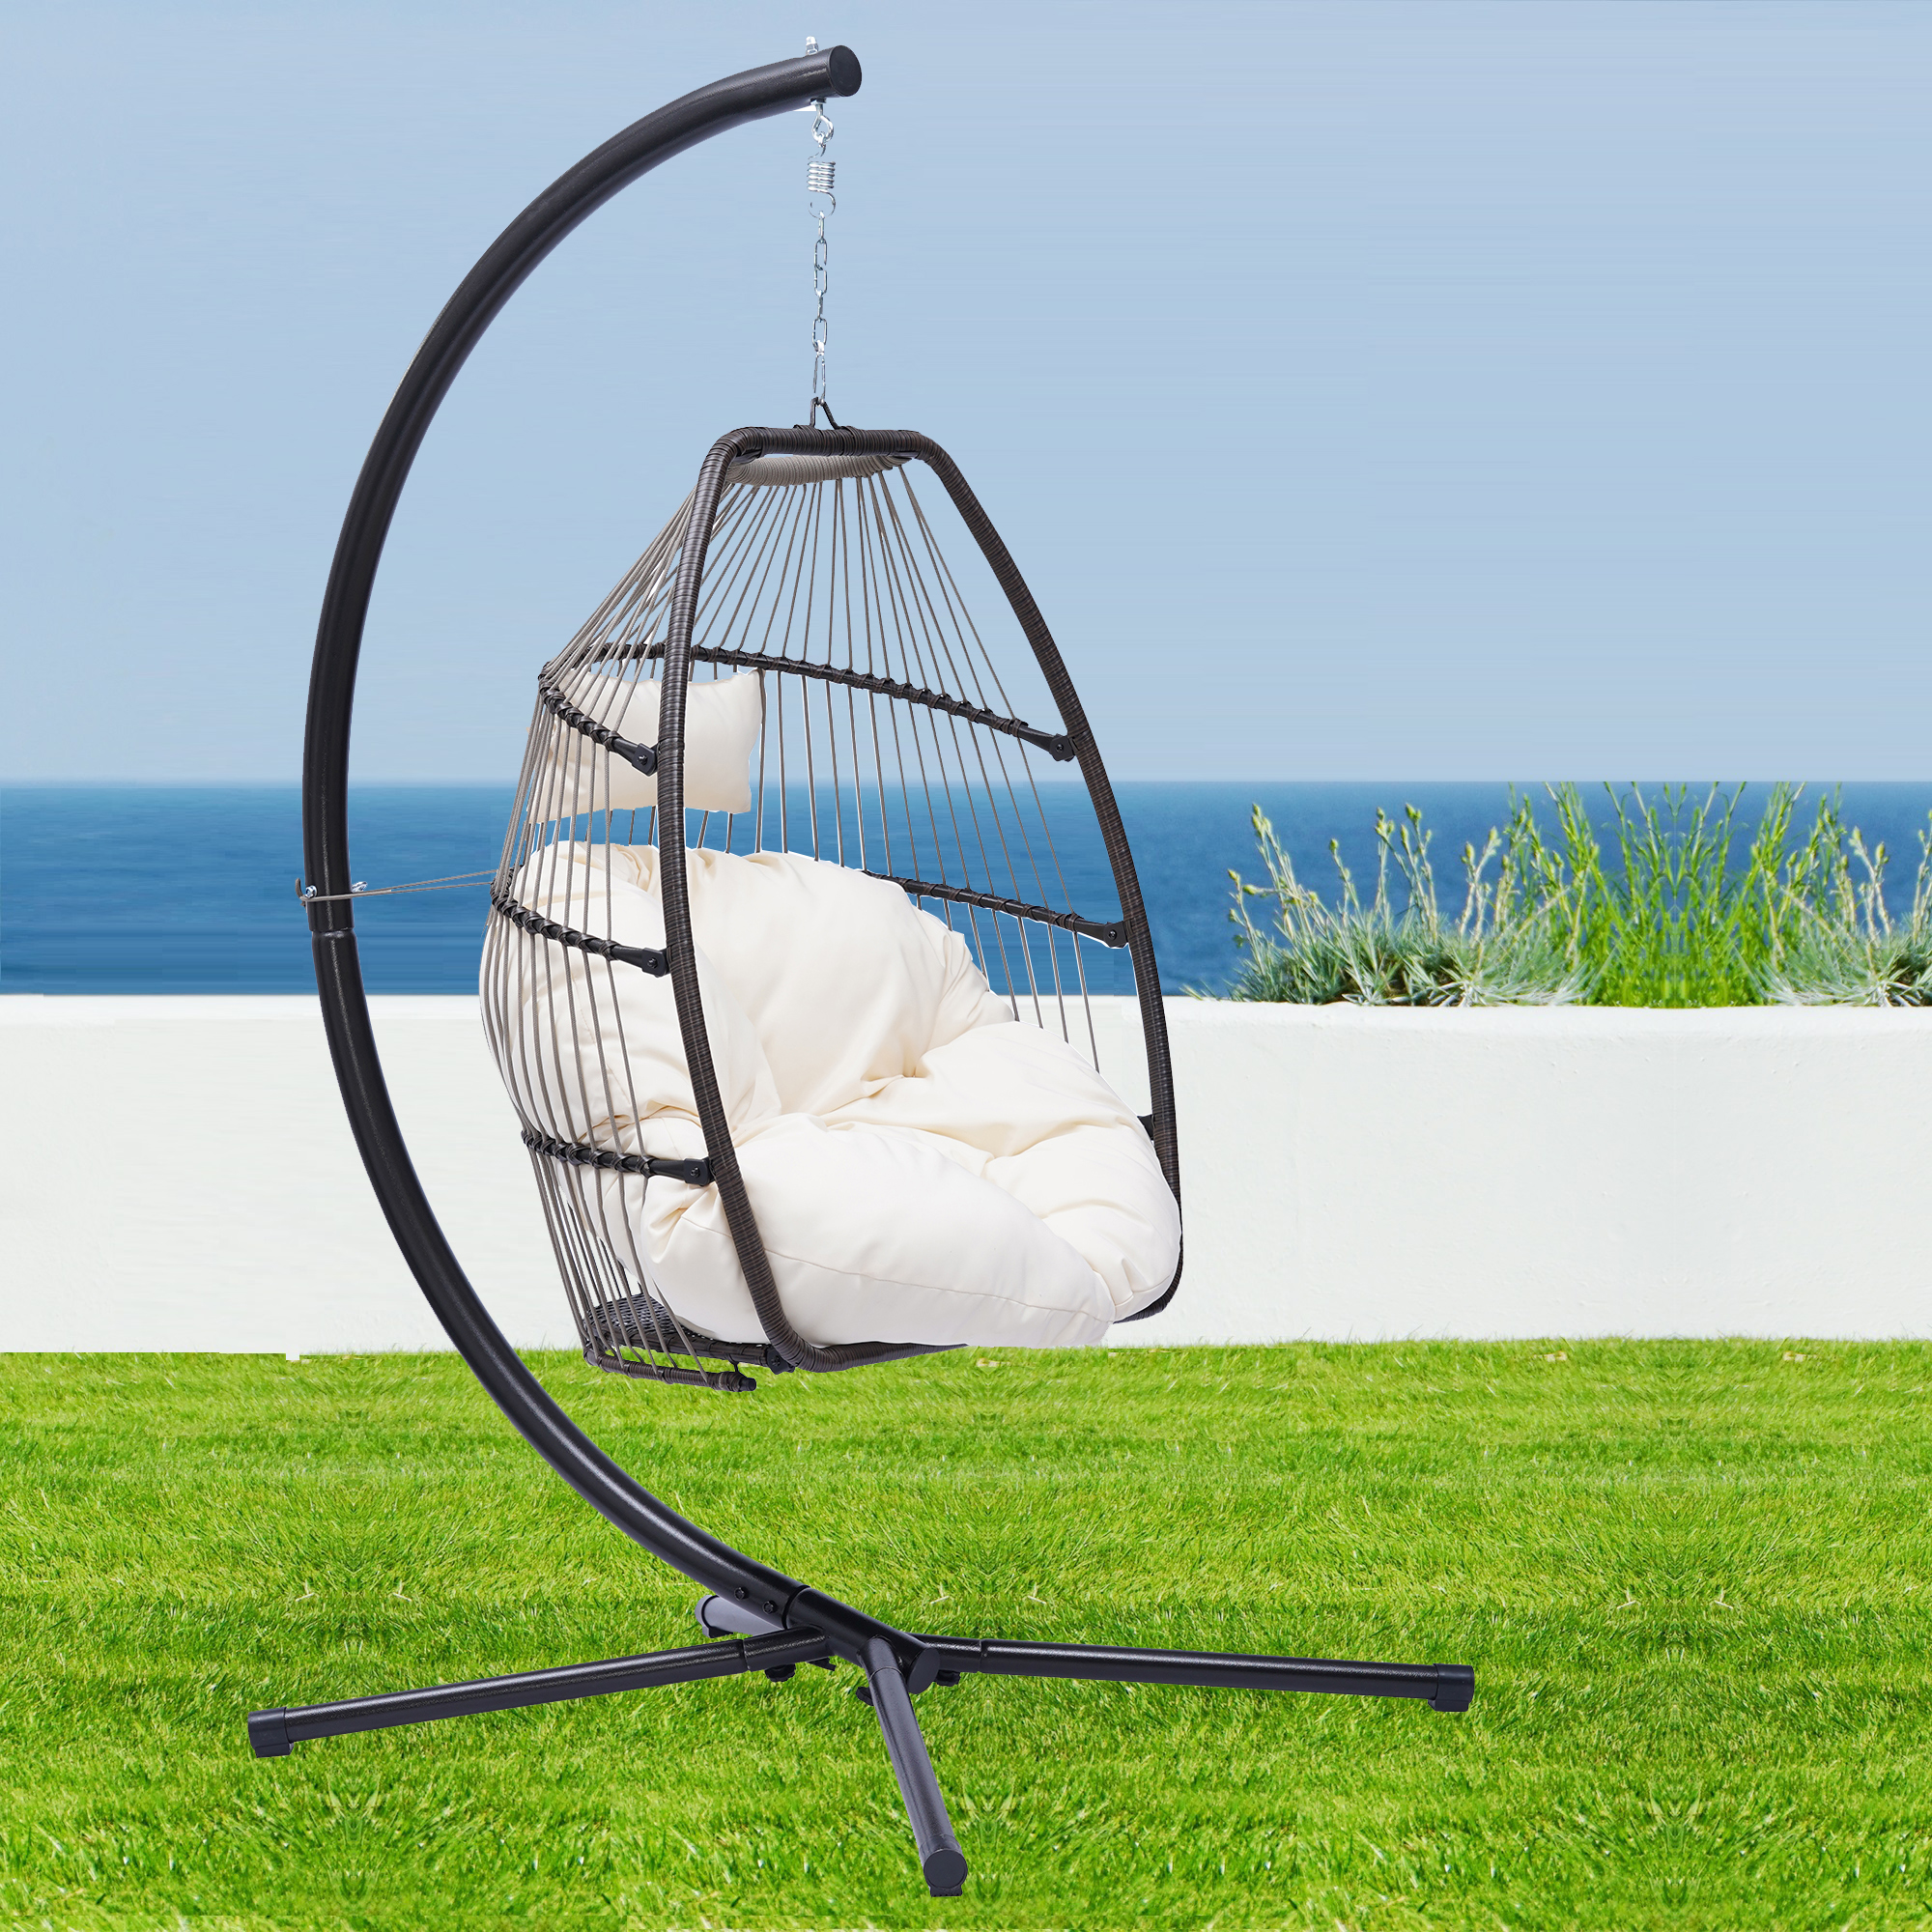 Hanging Chair Swing Egg Chair, Outdoor Rattan Egg Swing Chair, Heavy Duty Hammock Chair with Stand, Cushion and Pillow, Steel Frame Loading 250lbs for Indoor Outdoor Bedroom Patio Garden, B047 - image 1 of 10